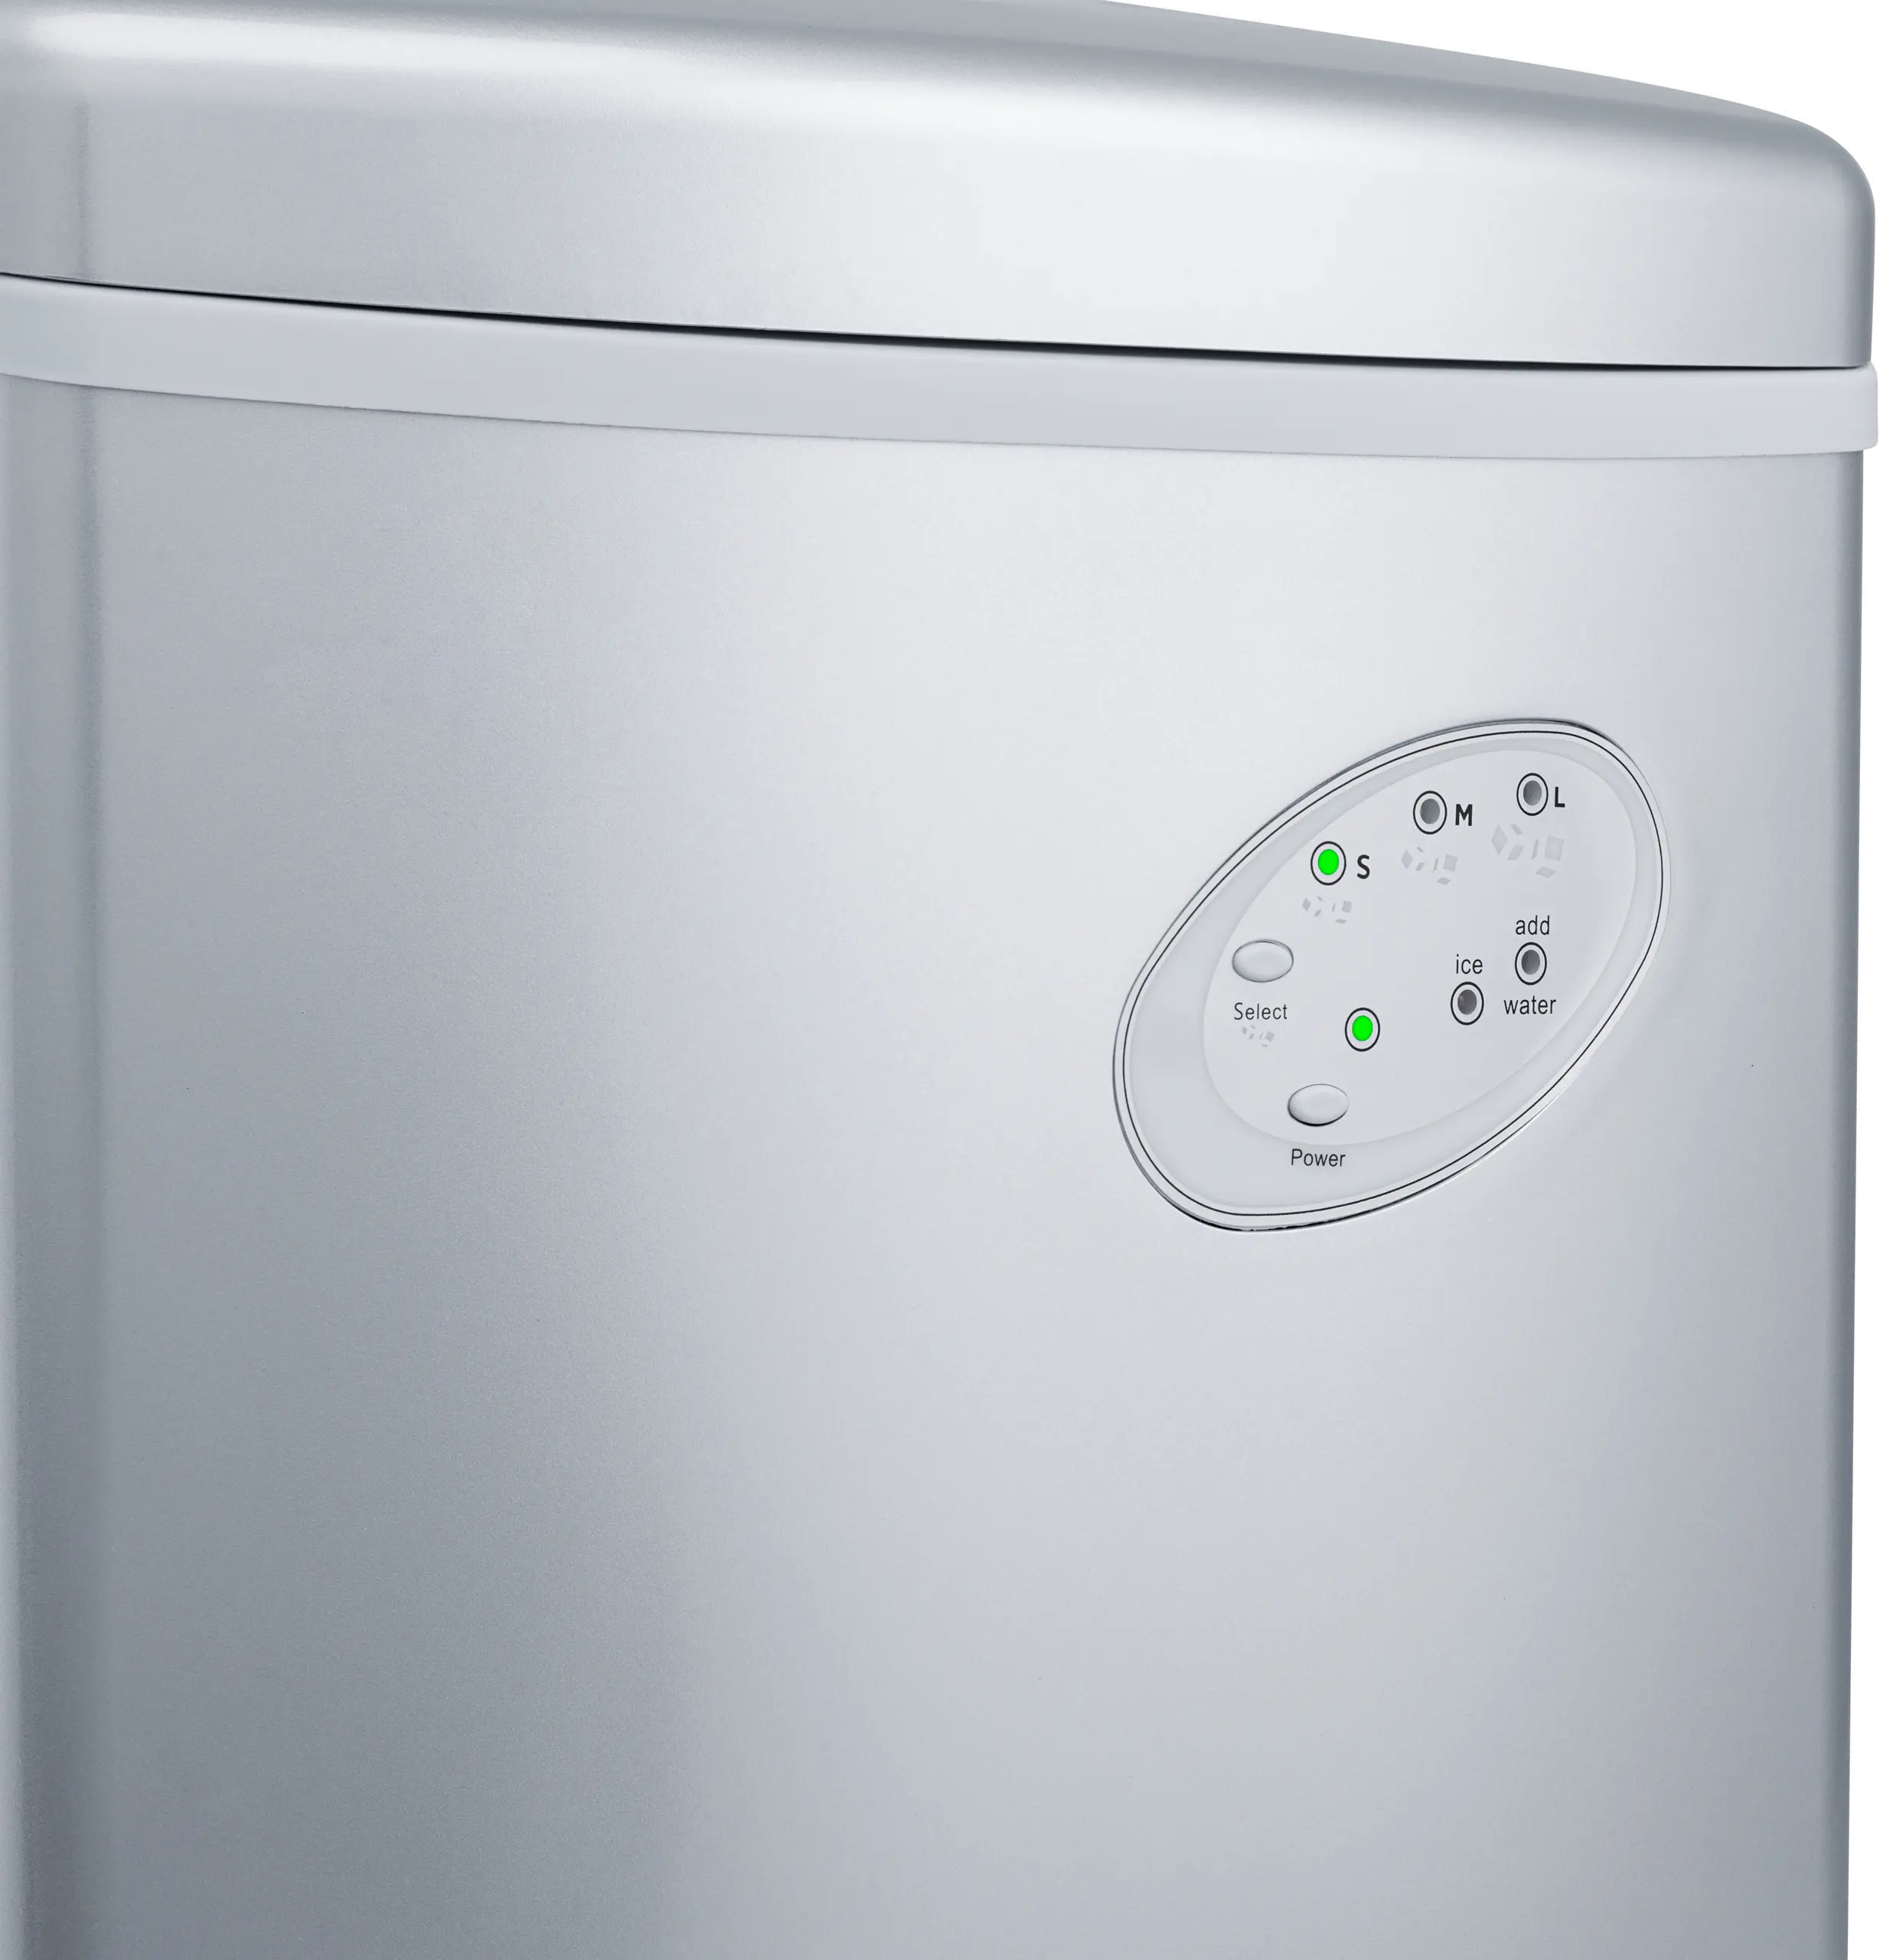 New Air Ai-100 28 lb Portable Ice Maker - Stainless Steel